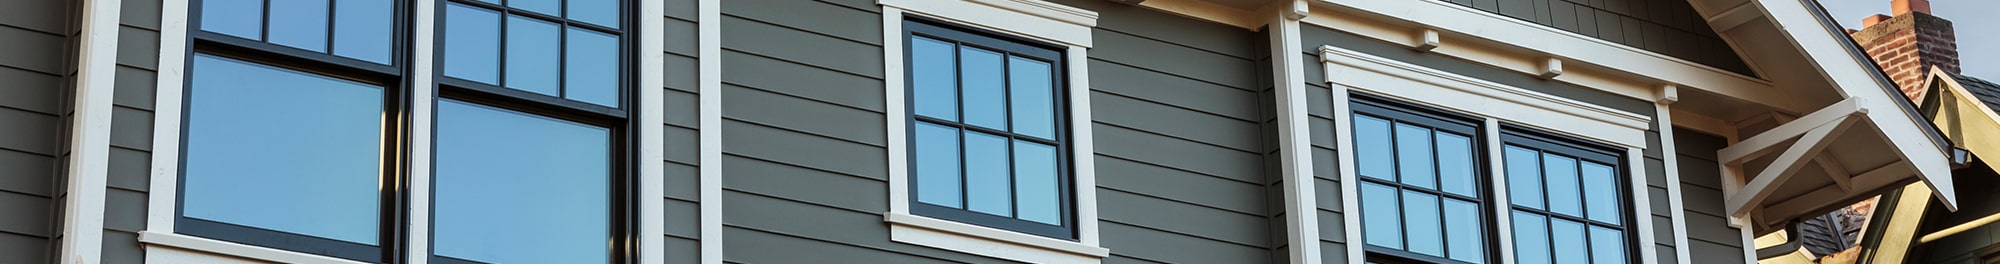 Window replacement & installation company in South Milwaukee, Oak Creek, Franklin & Caledonia